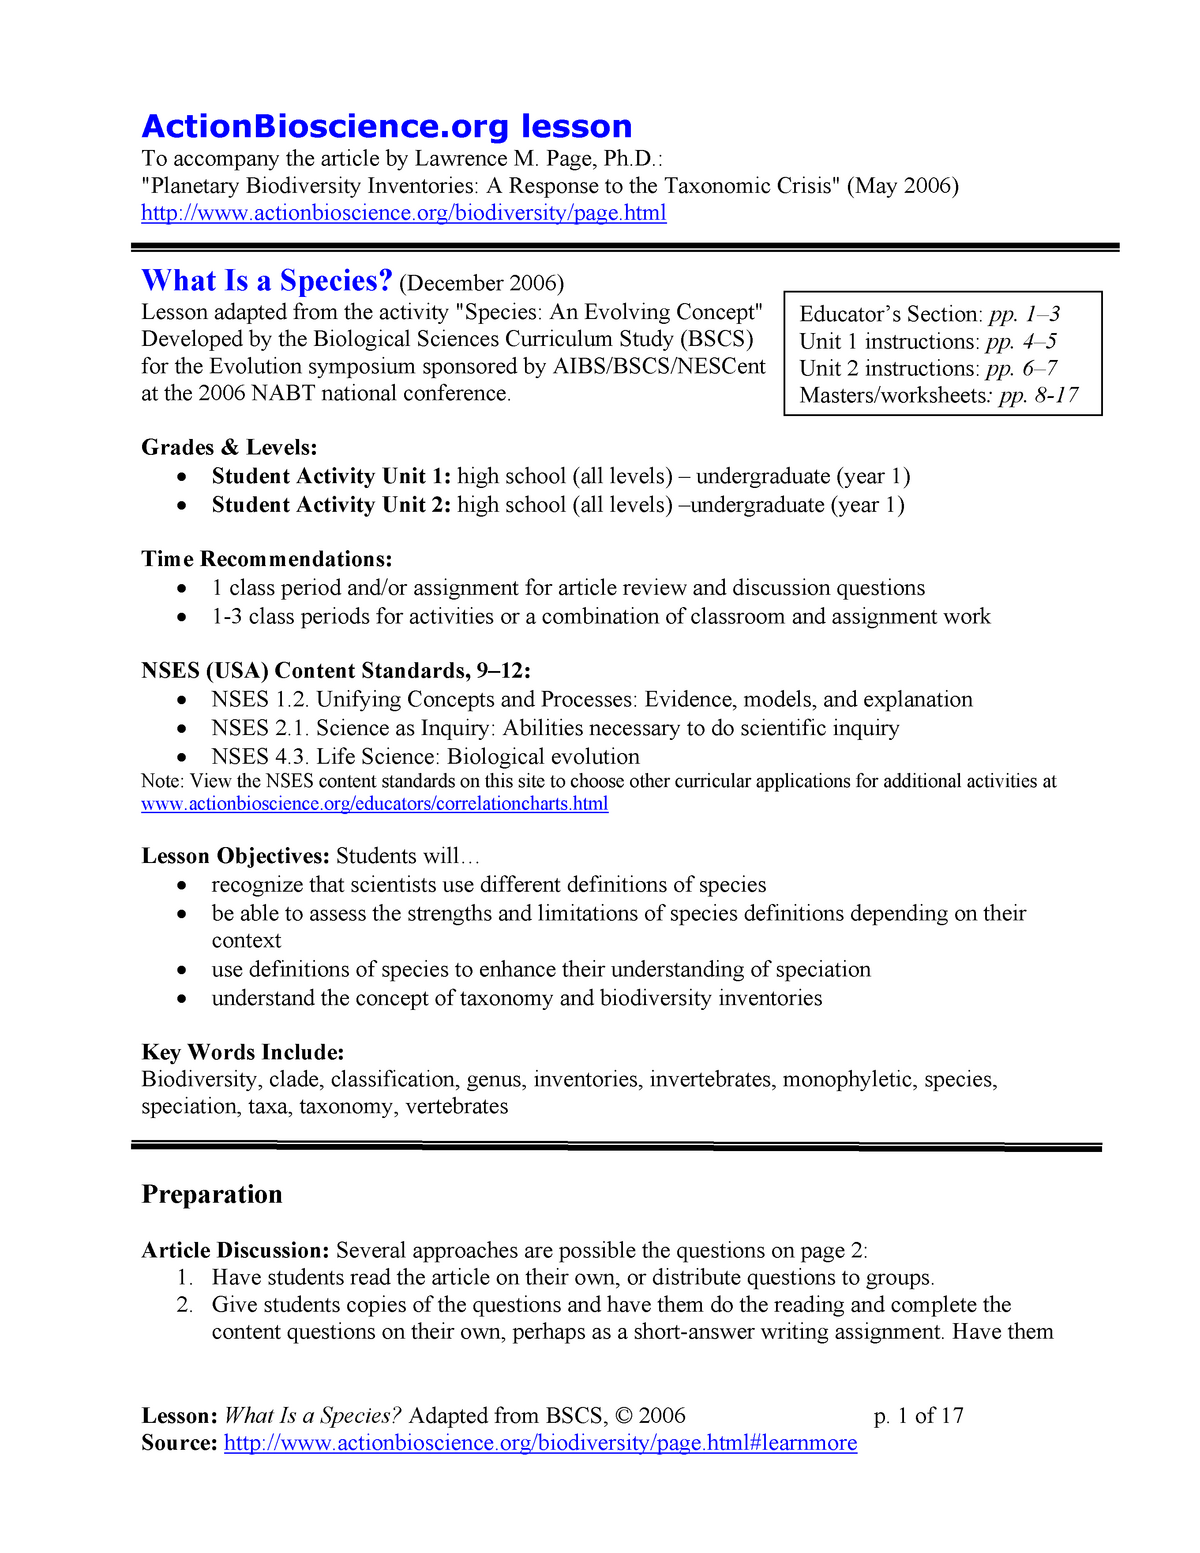 concepts-of-species-worksheet-lesson-what-is-a-species-adapted-from